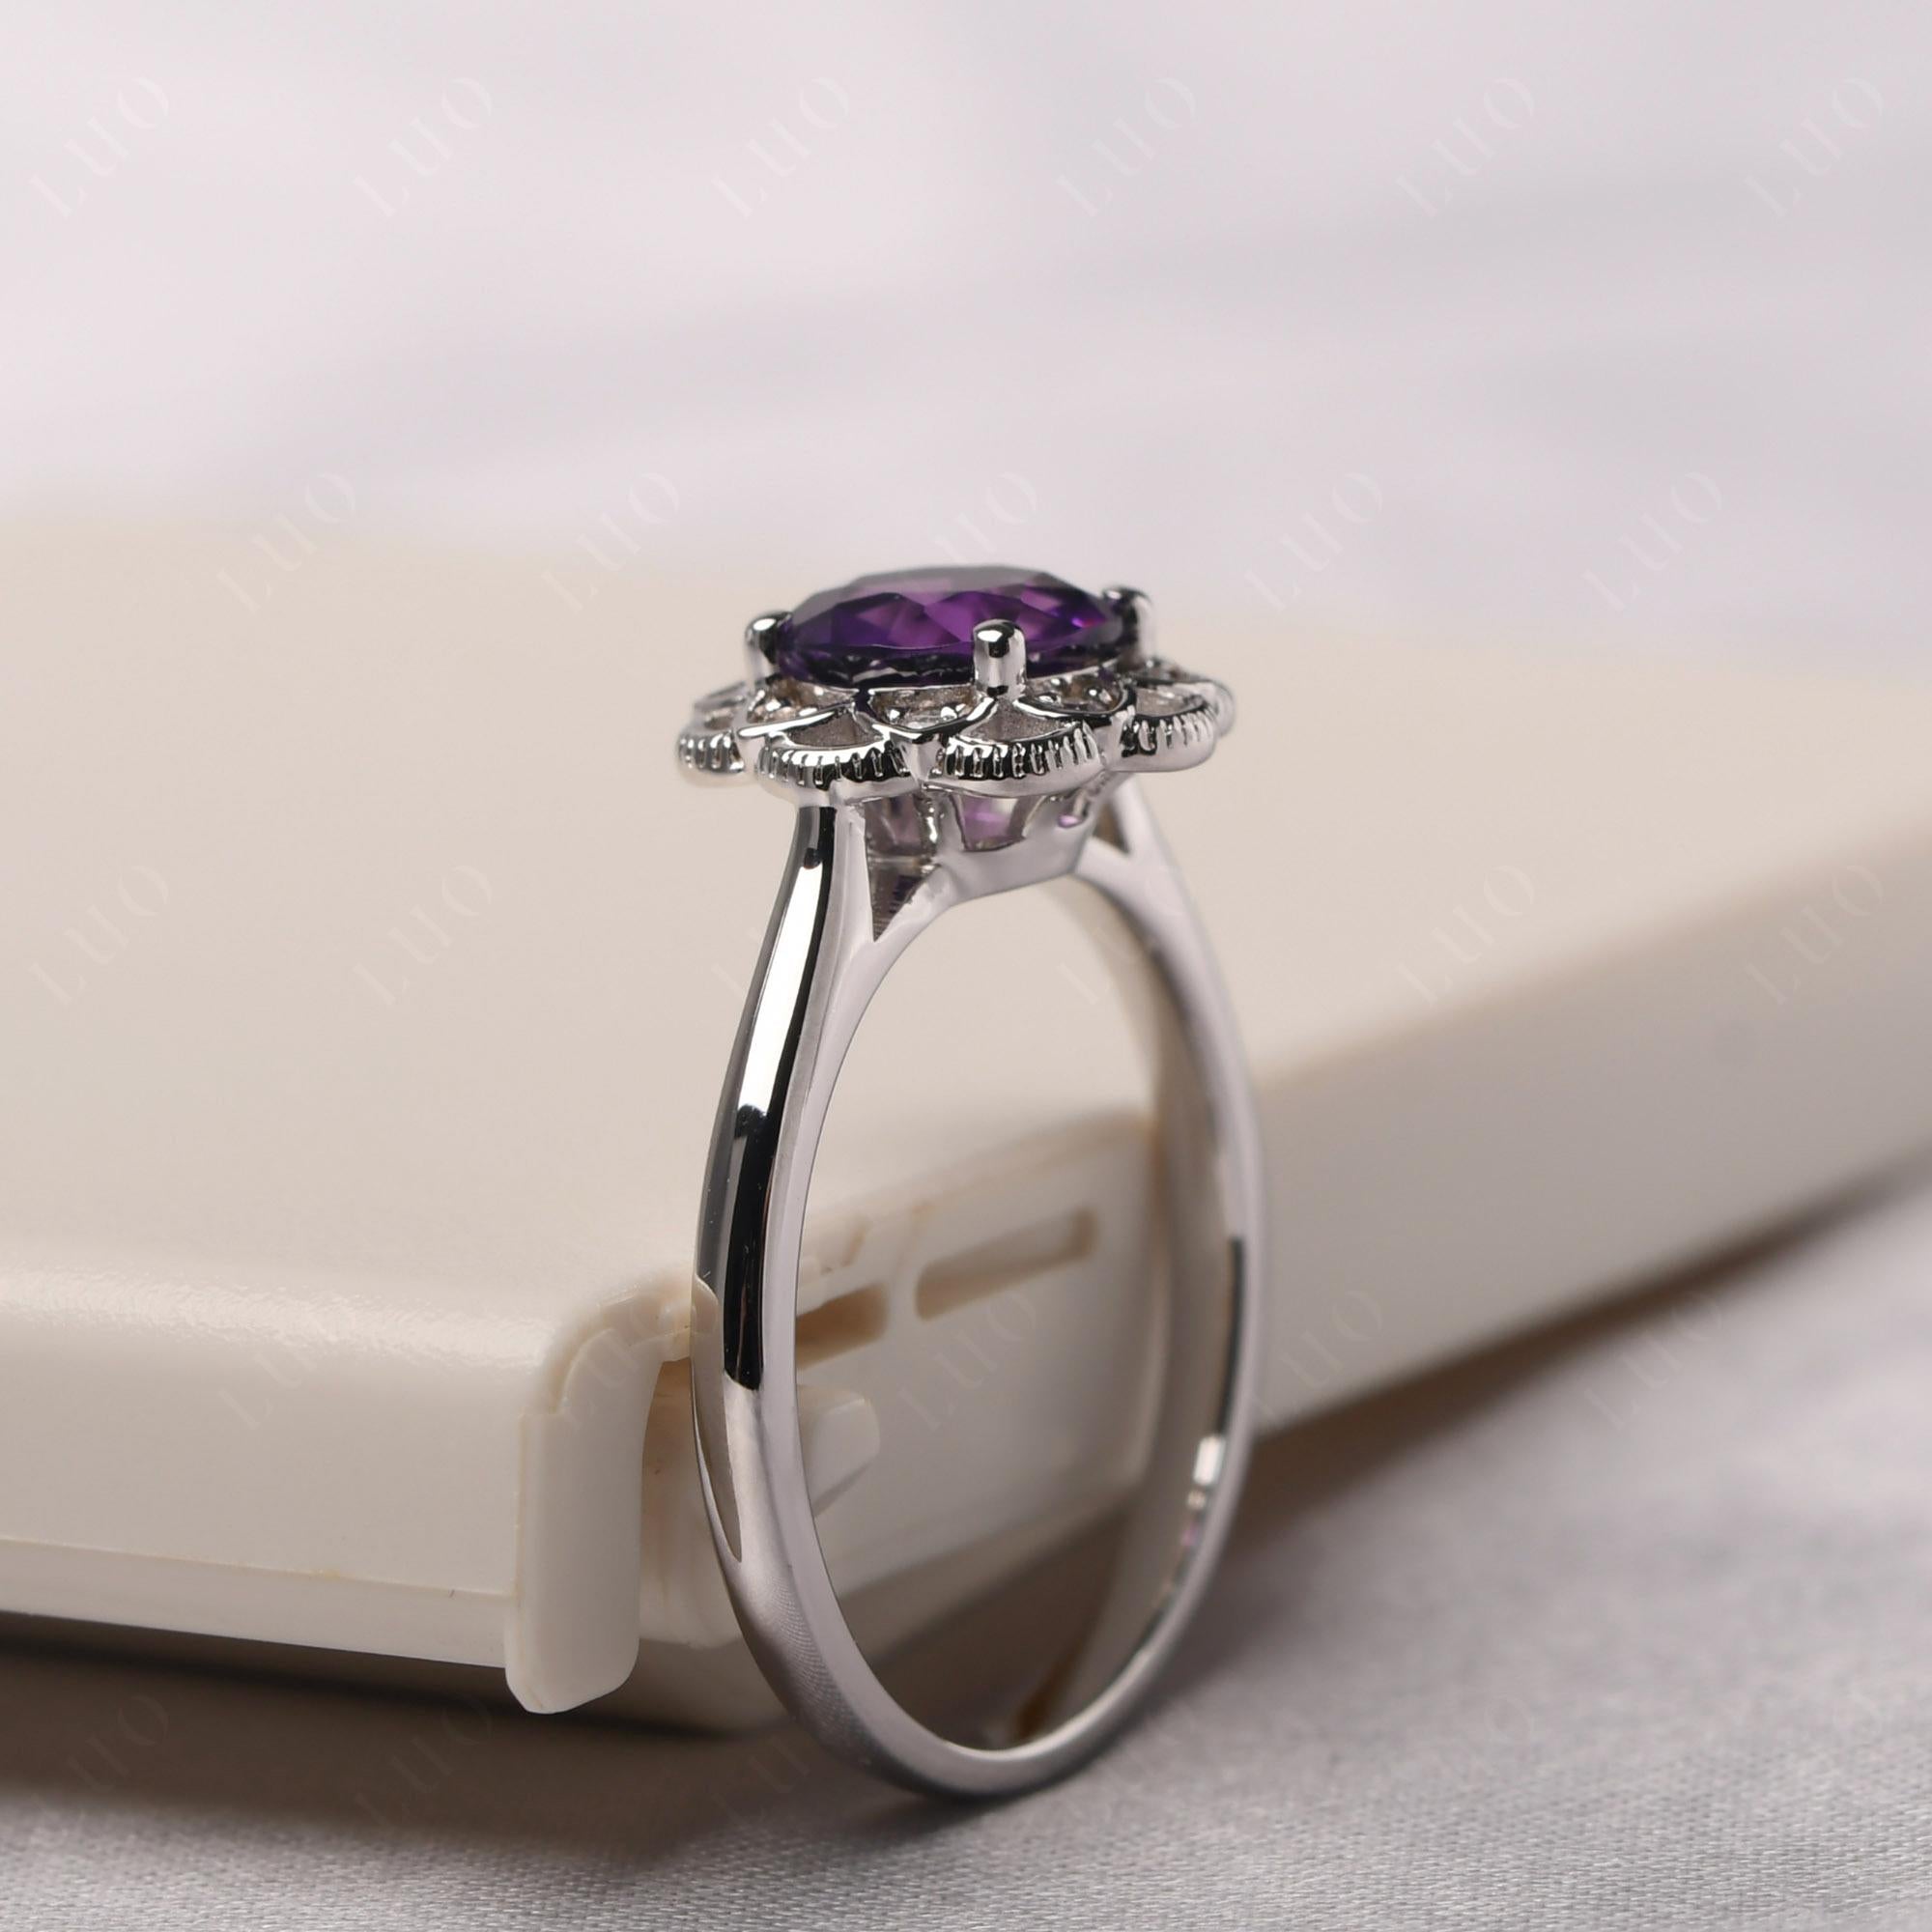 Amethyst Vintage Inspired Filigree Ring - LUO Jewelry